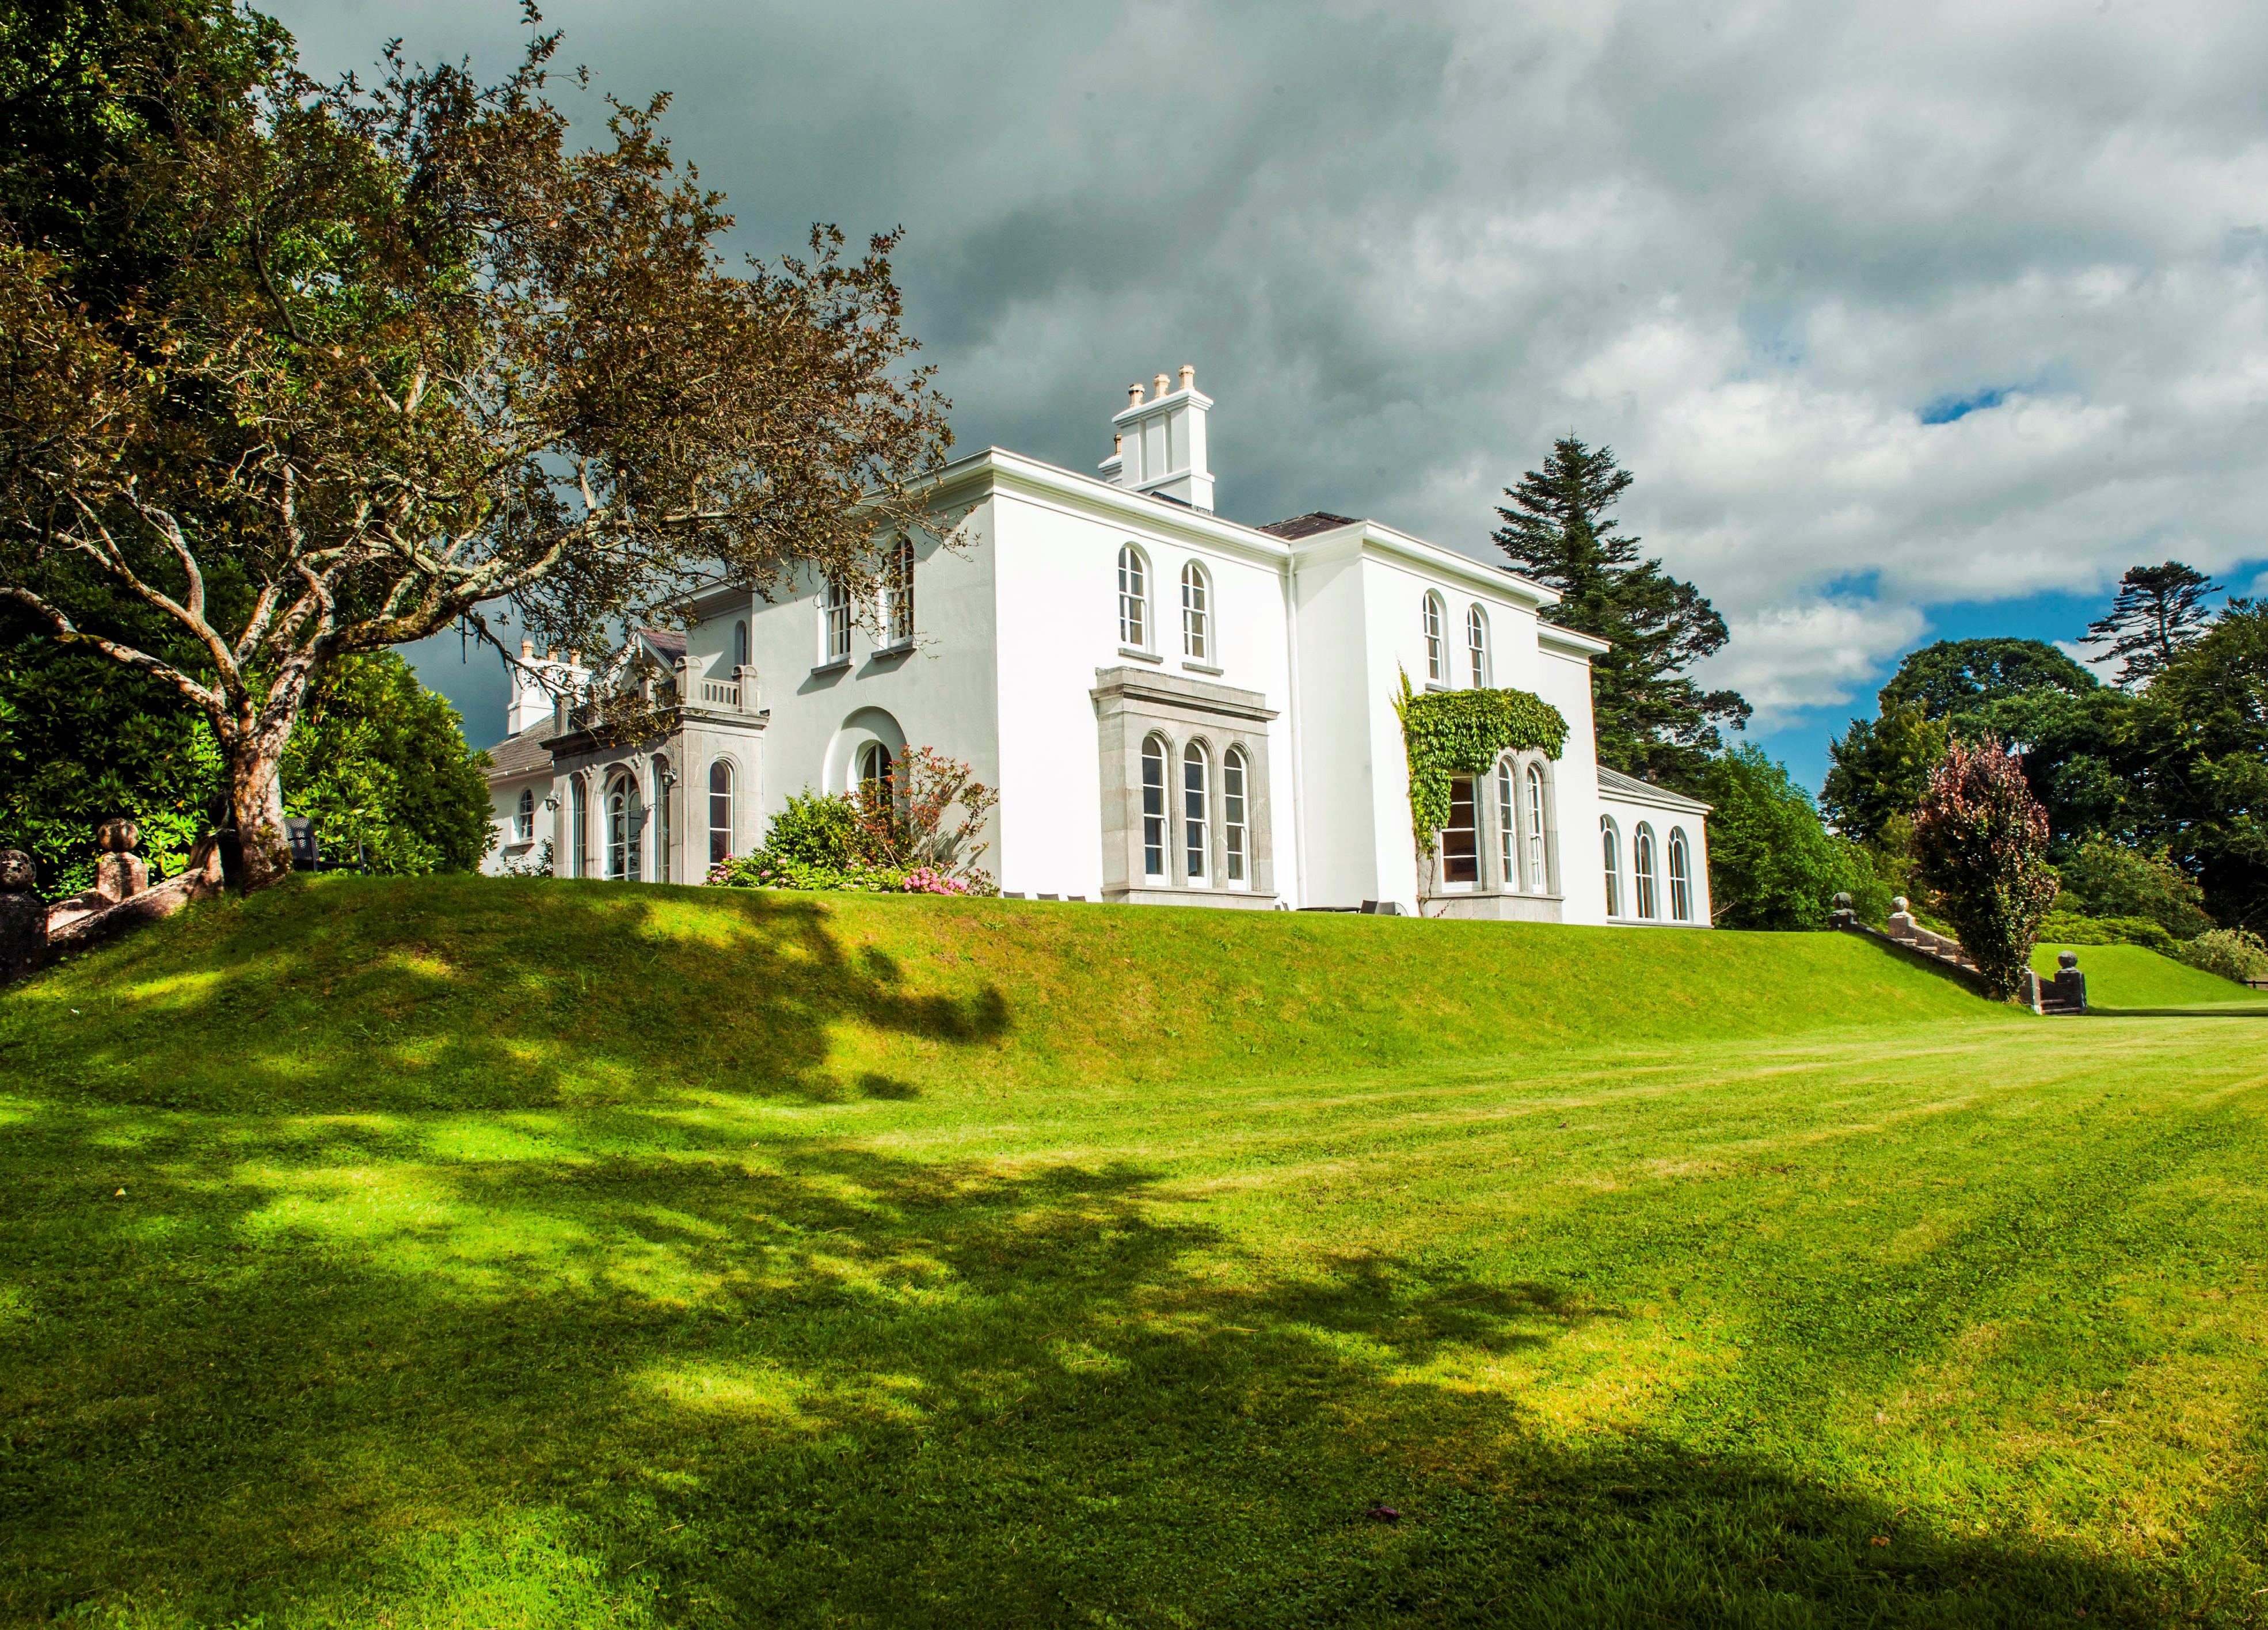 Coolclogher House from the grounds outside